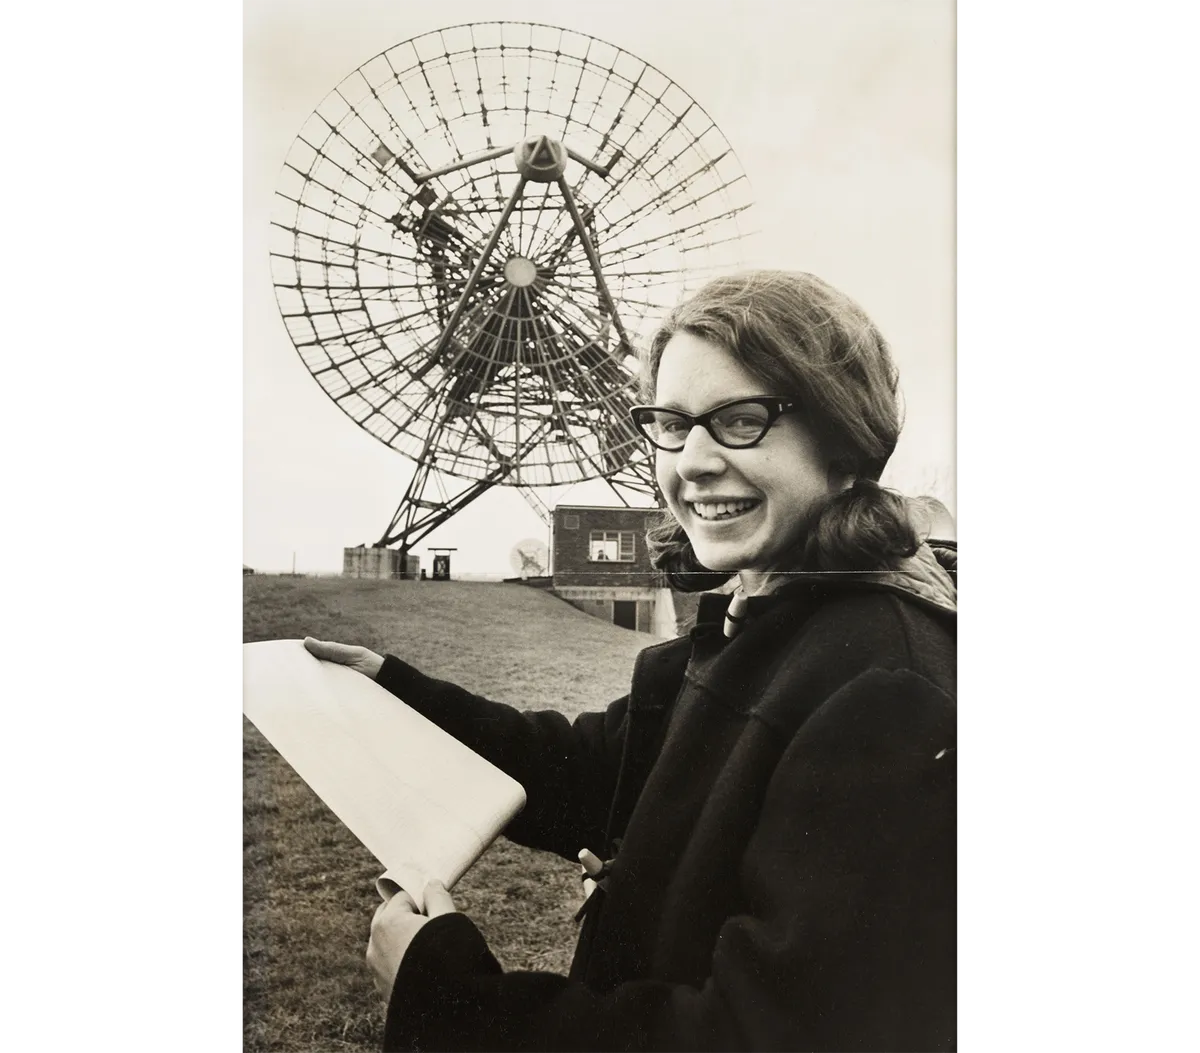 Jocelyn Bell Burnell pictured in 1968 at Mullard Radio Astronomy Observatory at Cambridge University, 1968. Credit: Daily Herald Archive/SSPL/Getty Images.